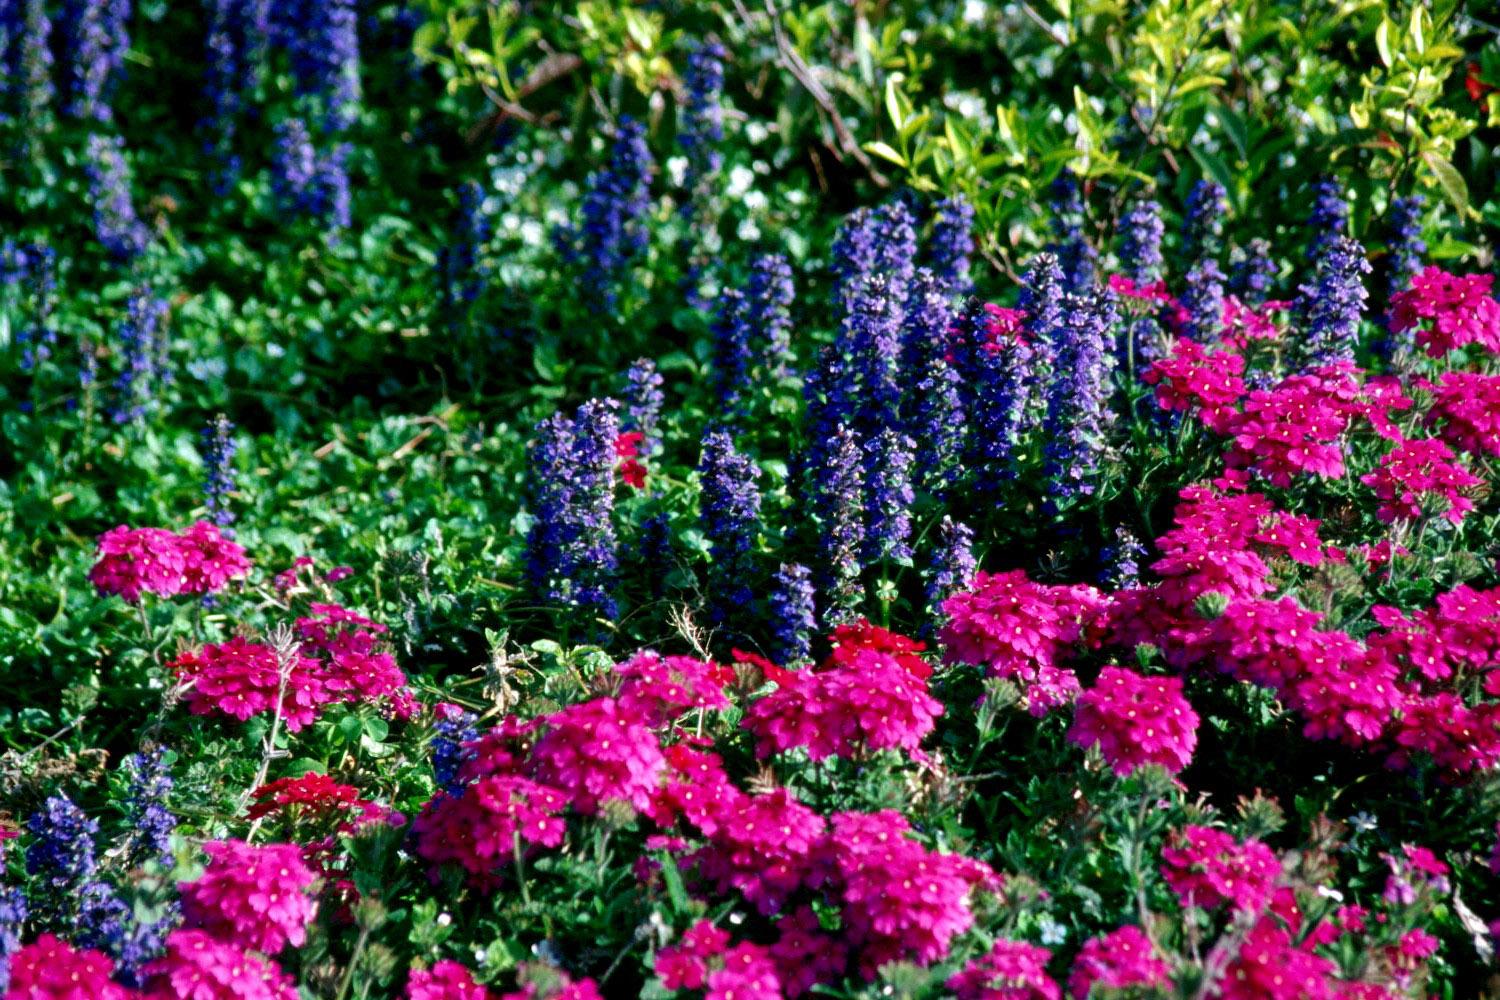 The bright blue blossoms of the ajuga stand tall and colorful in combination with these pink Babylon verbenas.